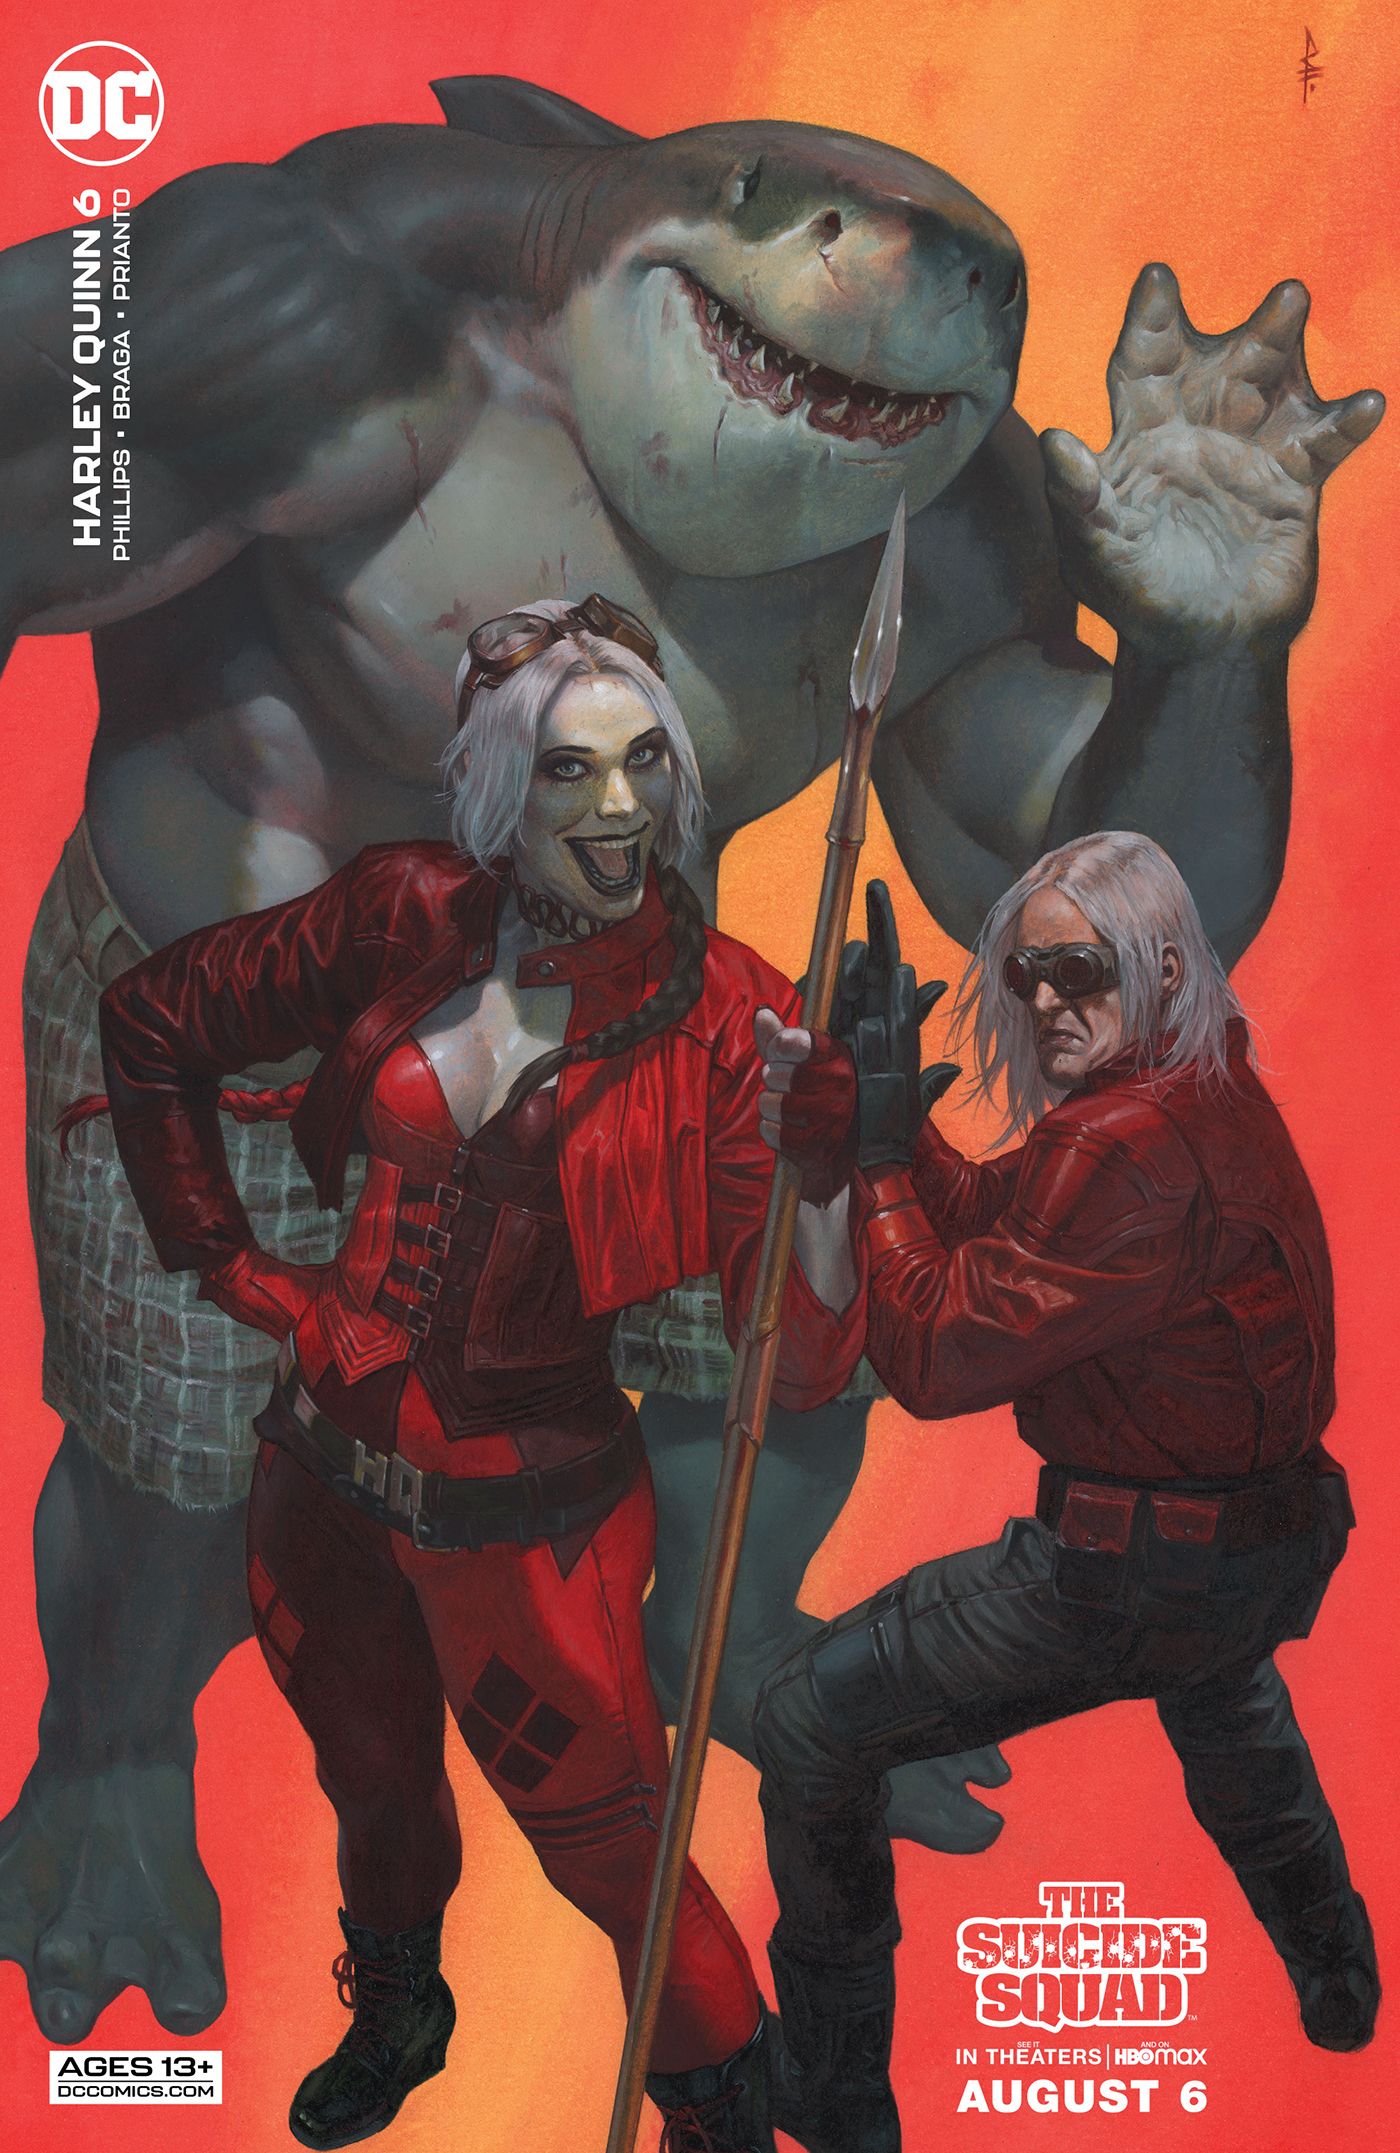 A variant cover sees Harley Quinn, King Shark and Savant from The Suicide Squad.